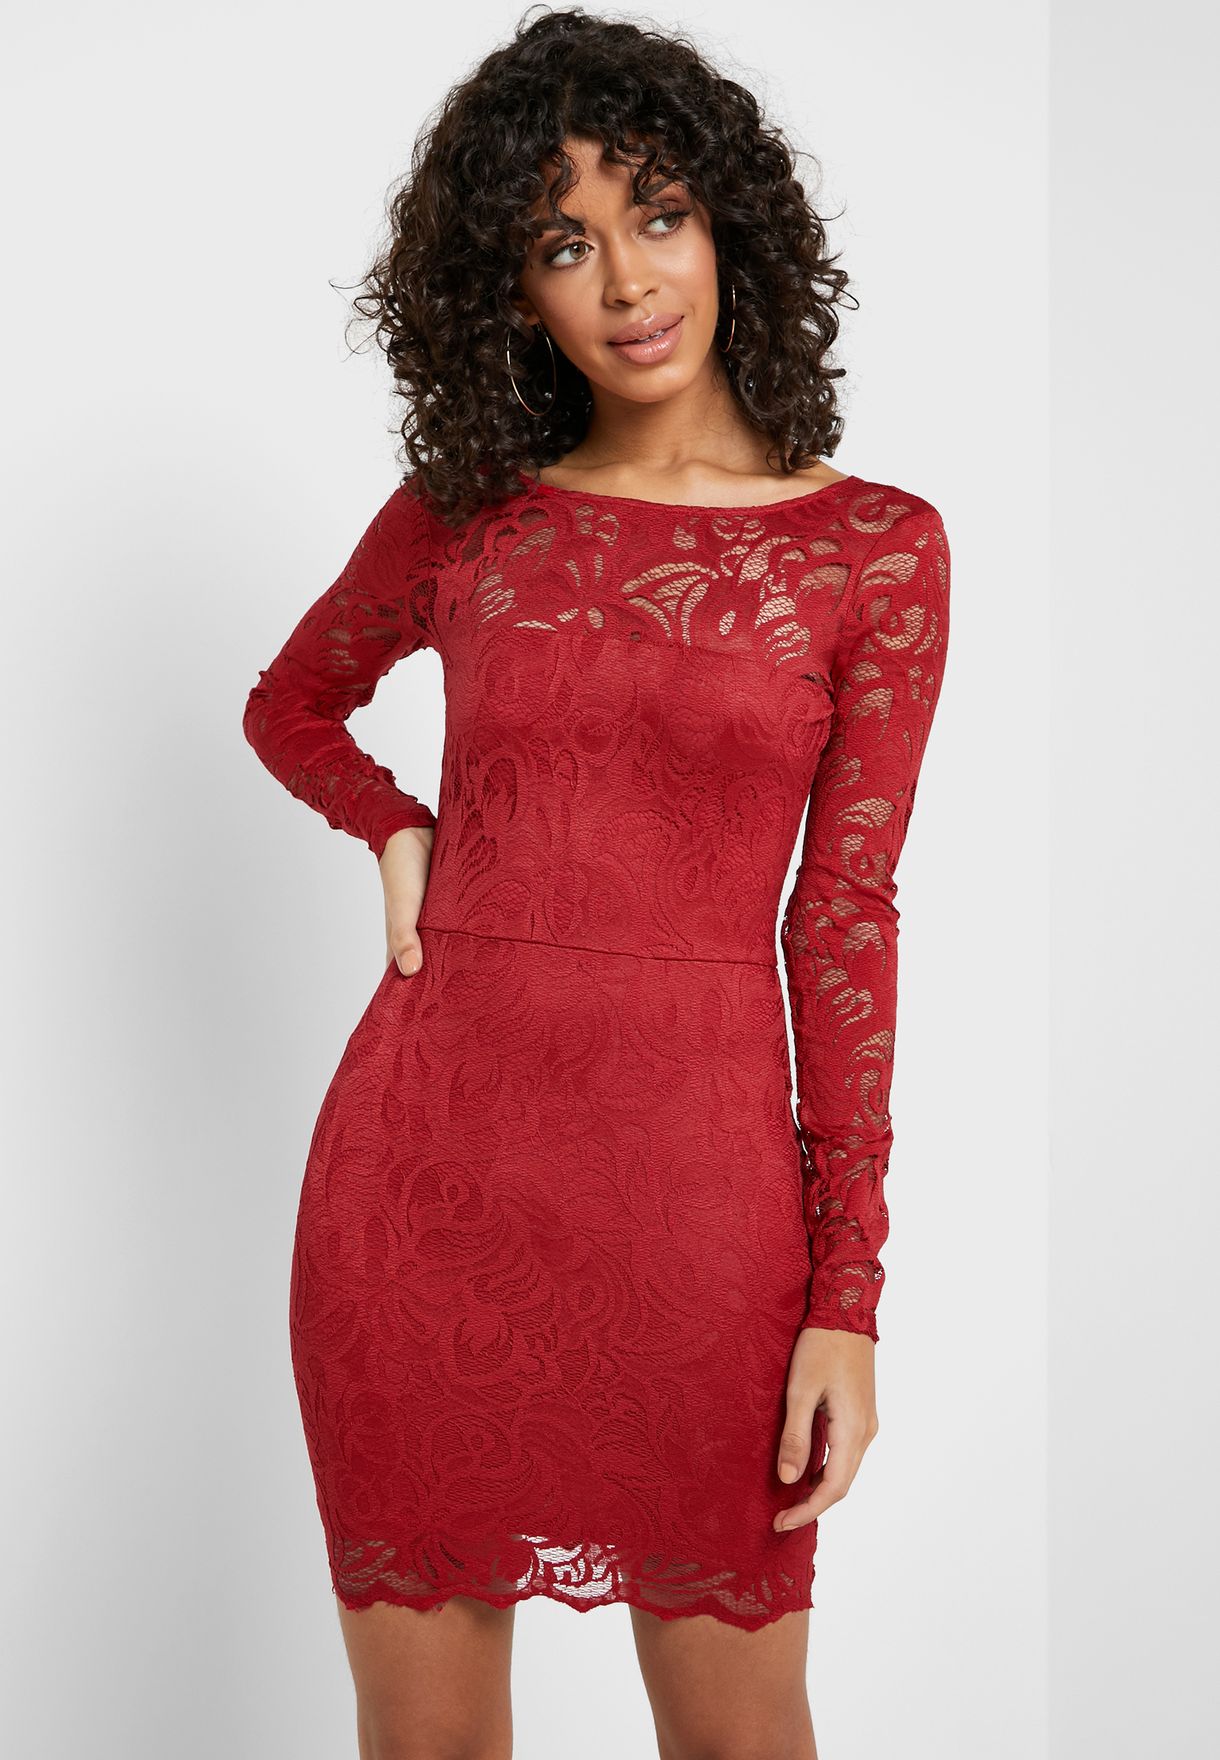 Forever 21 Lace Dress Hotsell, 57% OFF ...